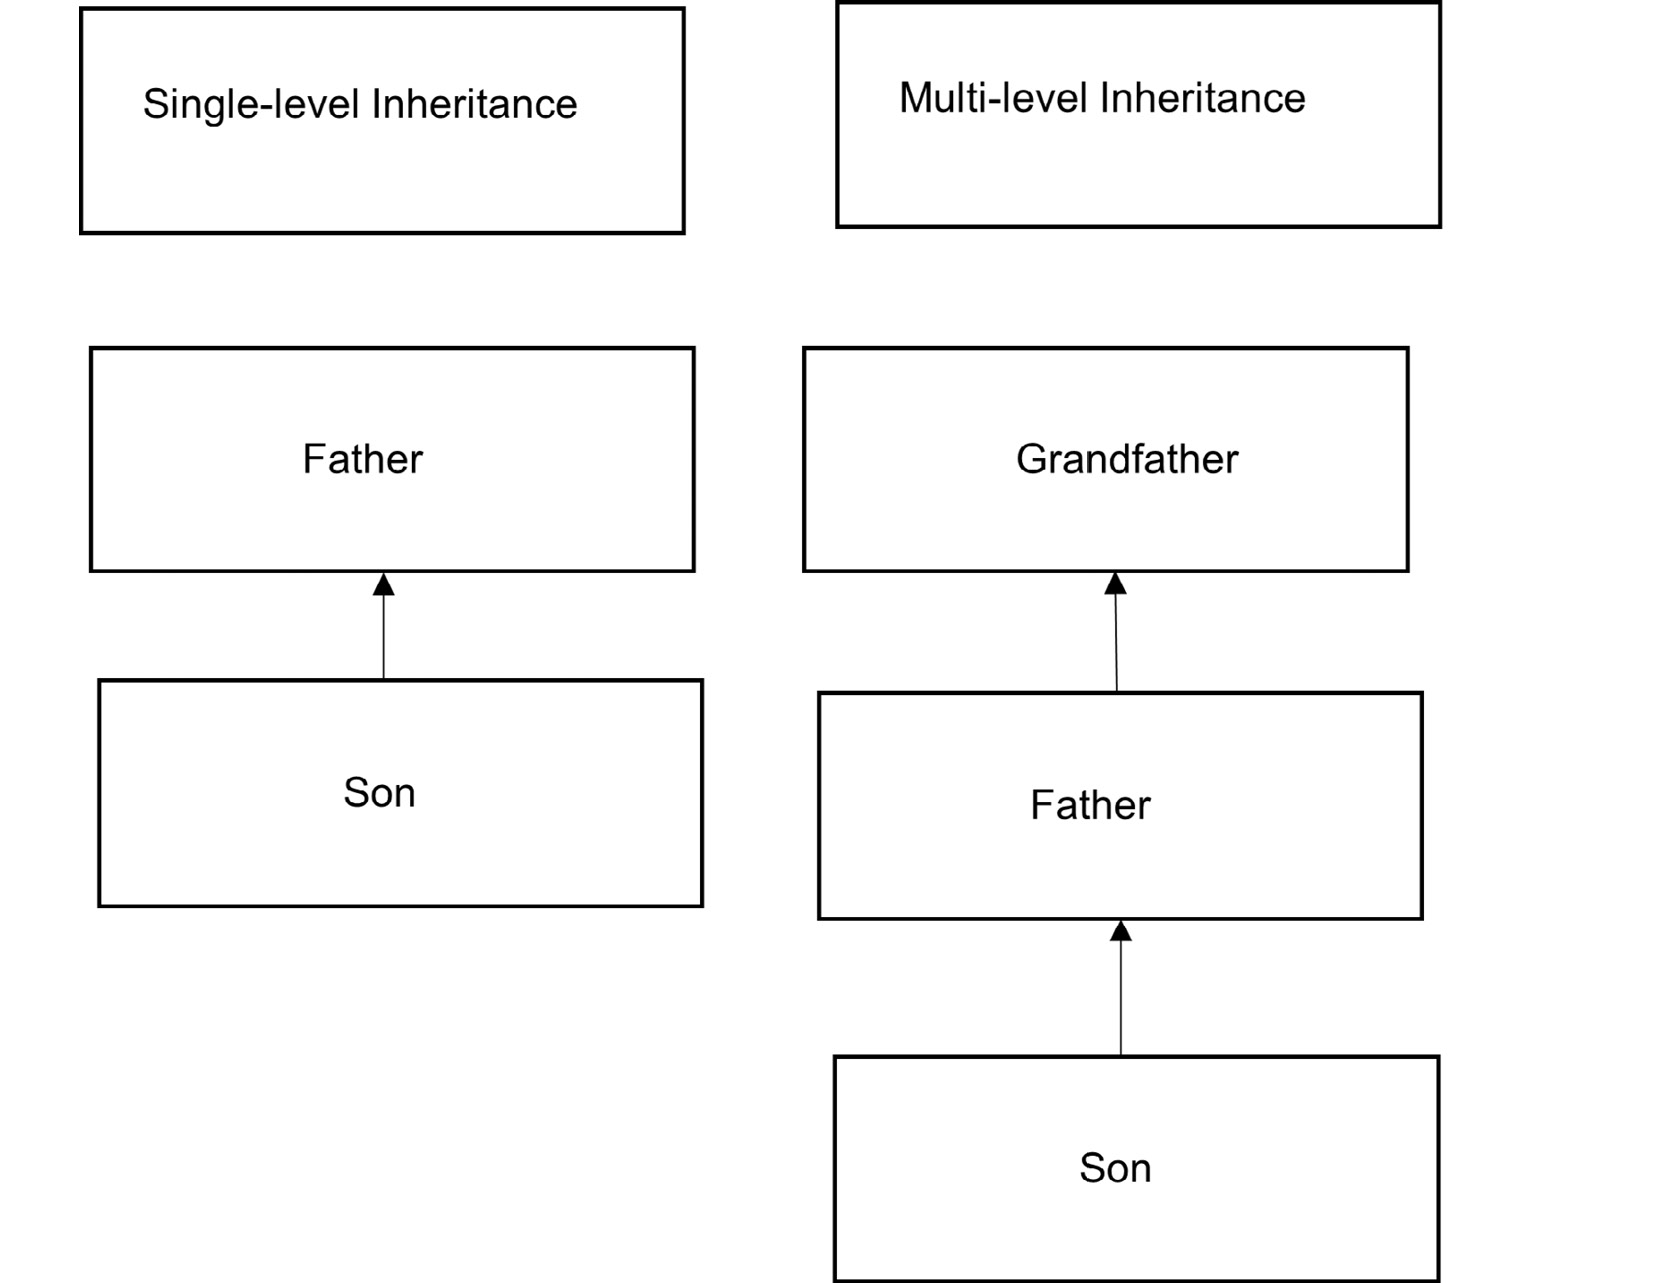 Figure 5.2: An example of single- and multi-level inheritance
